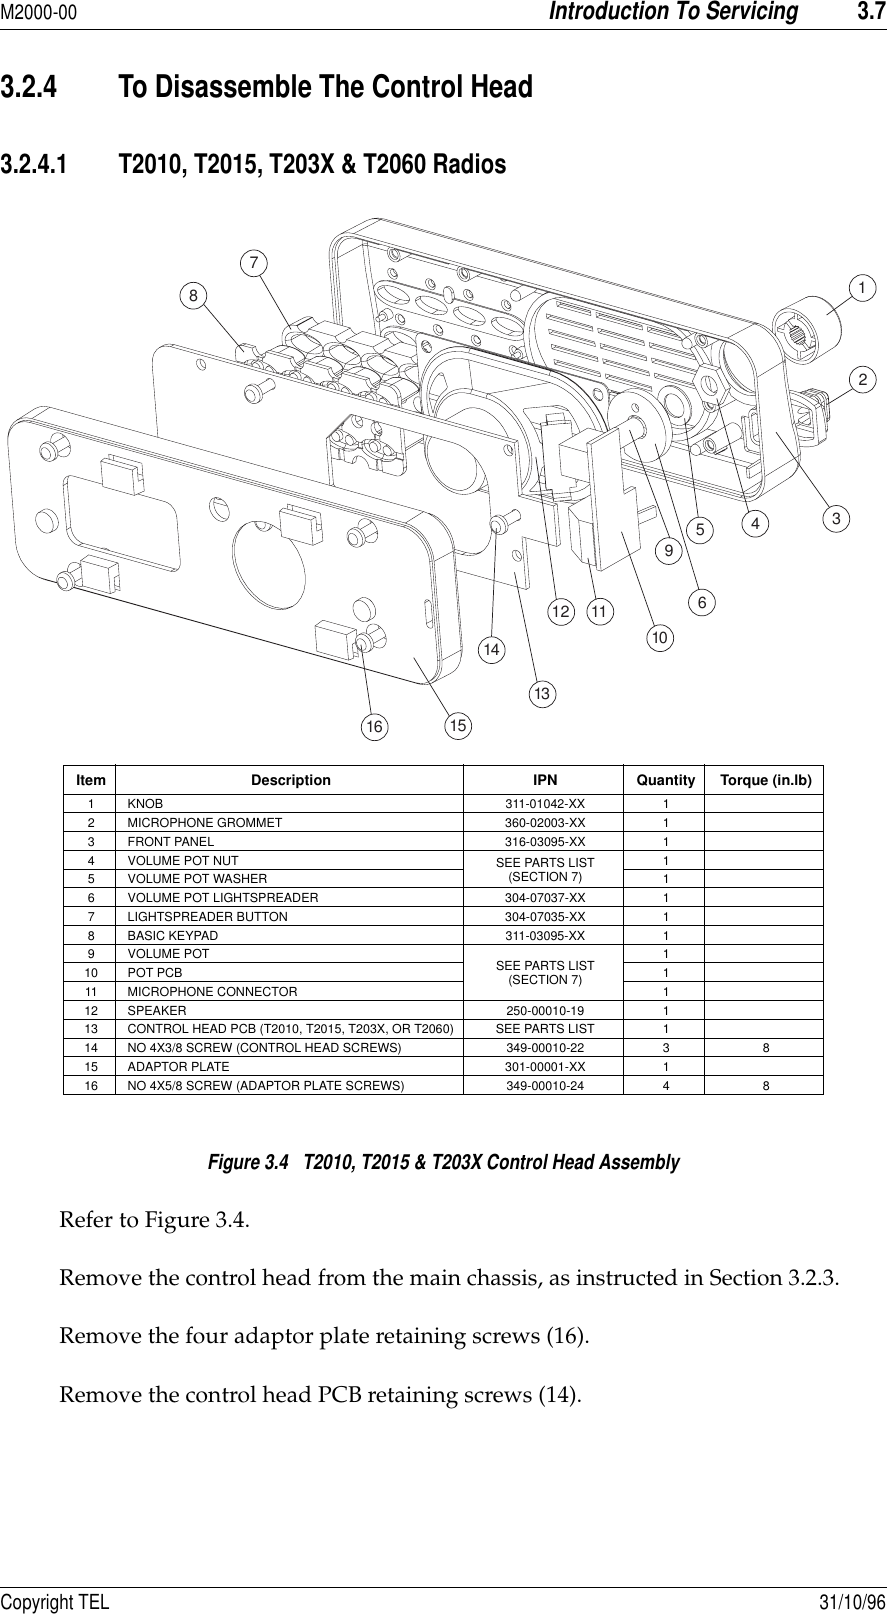 M2000-00Introduction To Servicing3.7Copyright TEL 31/10/963.2.4 To Disassemble The Control Head3.2.4.1 T2010, T2015, T203X &amp; T2060 Radios Figure 3.4   T2010, T2015 &amp; T203X Control Head AssemblyRefer to Figure 3.4.Remove the control head from the main chassis, as instructed in Section 3.2.3.Remove the four adaptor plate retaining screws (16).Remove the control head PCB retaining screws (14).Item Description IPN Quantity Torque (in.lb)1 KNOB 311-01042-XX 12 MICROPHONE GROMMET 360-02003-XX 13 FRONT PANEL 316-03095-XX 14 VOLUME POT NUT SEE PARTS LIST(SECTION 7)15 VOLUME POT WASHER 16 VOLUME POT LIGHTSPREADER 304-07037-XX 17 LIGHTSPREADER BUTTON 304-07035-XX 18 BASIC KEYPAD 311-03095-XX 19VOLUME POT SEE PARTS LIST(SECTION 7)110 POT PCB 111 MICROPHONE CONNECTOR 112 SPEAKER 250-00010-19 113 CONTROL HEAD PCB (T2010, T2015, T203X, OR T2060) SEE PARTS LIST 114 NO 4X3/8 SCREW (CONTROL HEAD SCREWS) 349-00010-22 3 815 ADAPTOR PLATE 301-00001-XX 116 NO 4X5/8 SCREW (ADAPTOR PLATE SCREWS) 349-00010-24 4 878245691210131411151631